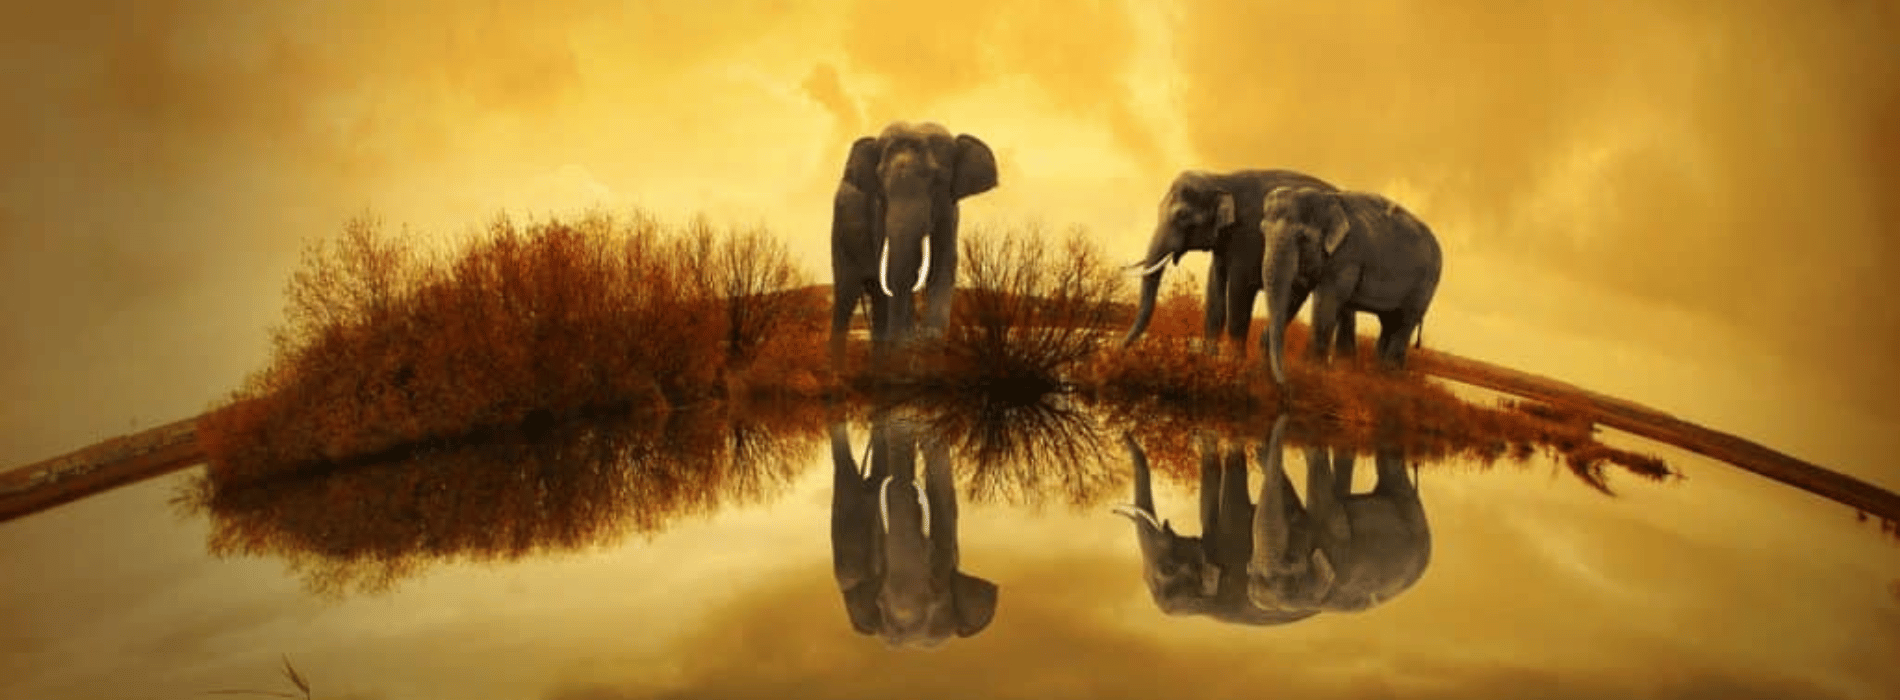 Spiritual meaning of the elephant